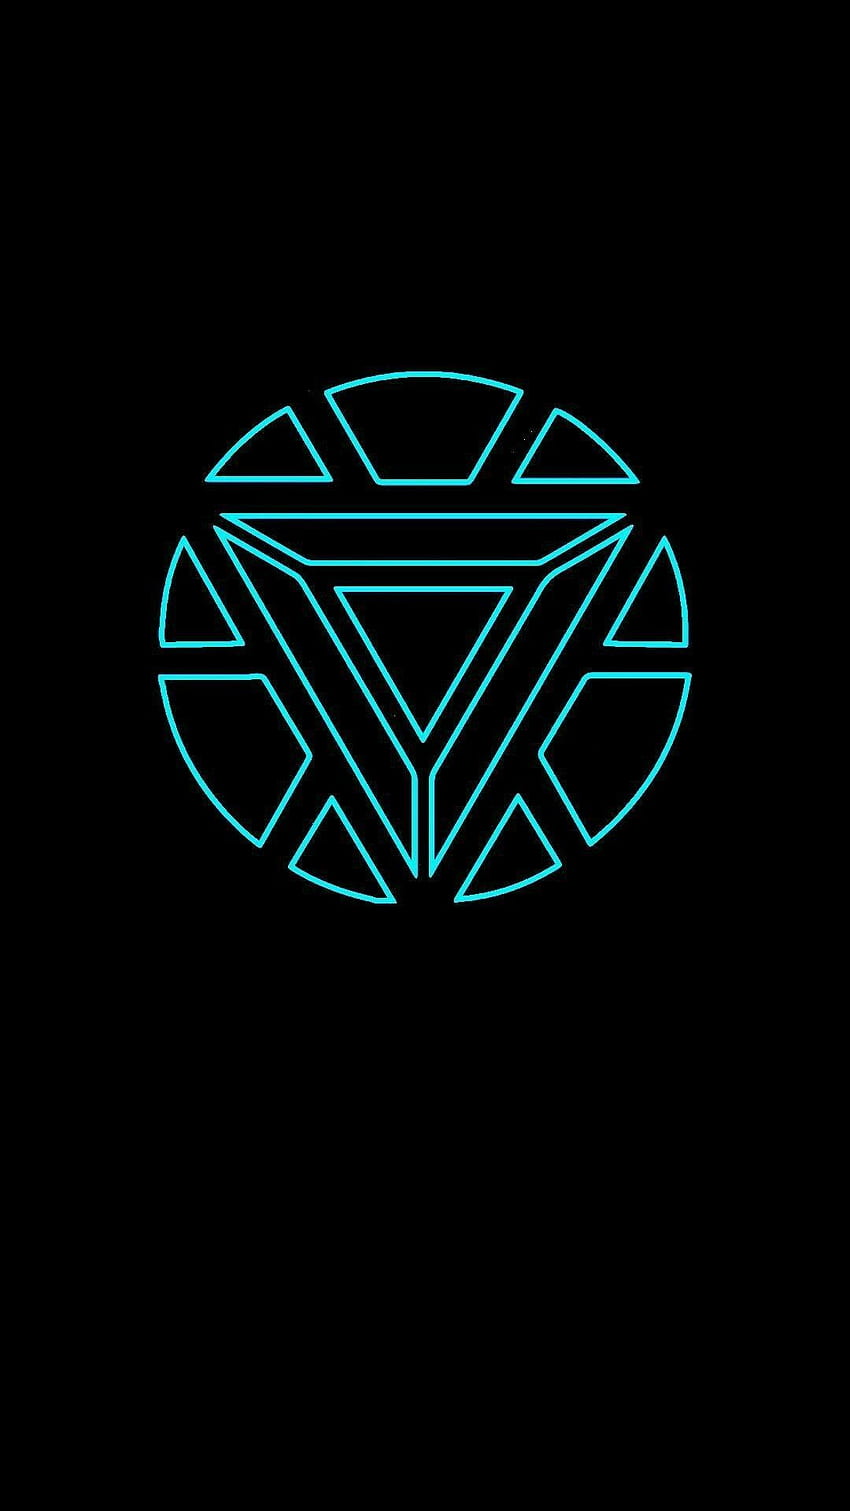 Arc Reactor Tattoo Unfinished by TytoVulpes on DeviantArt